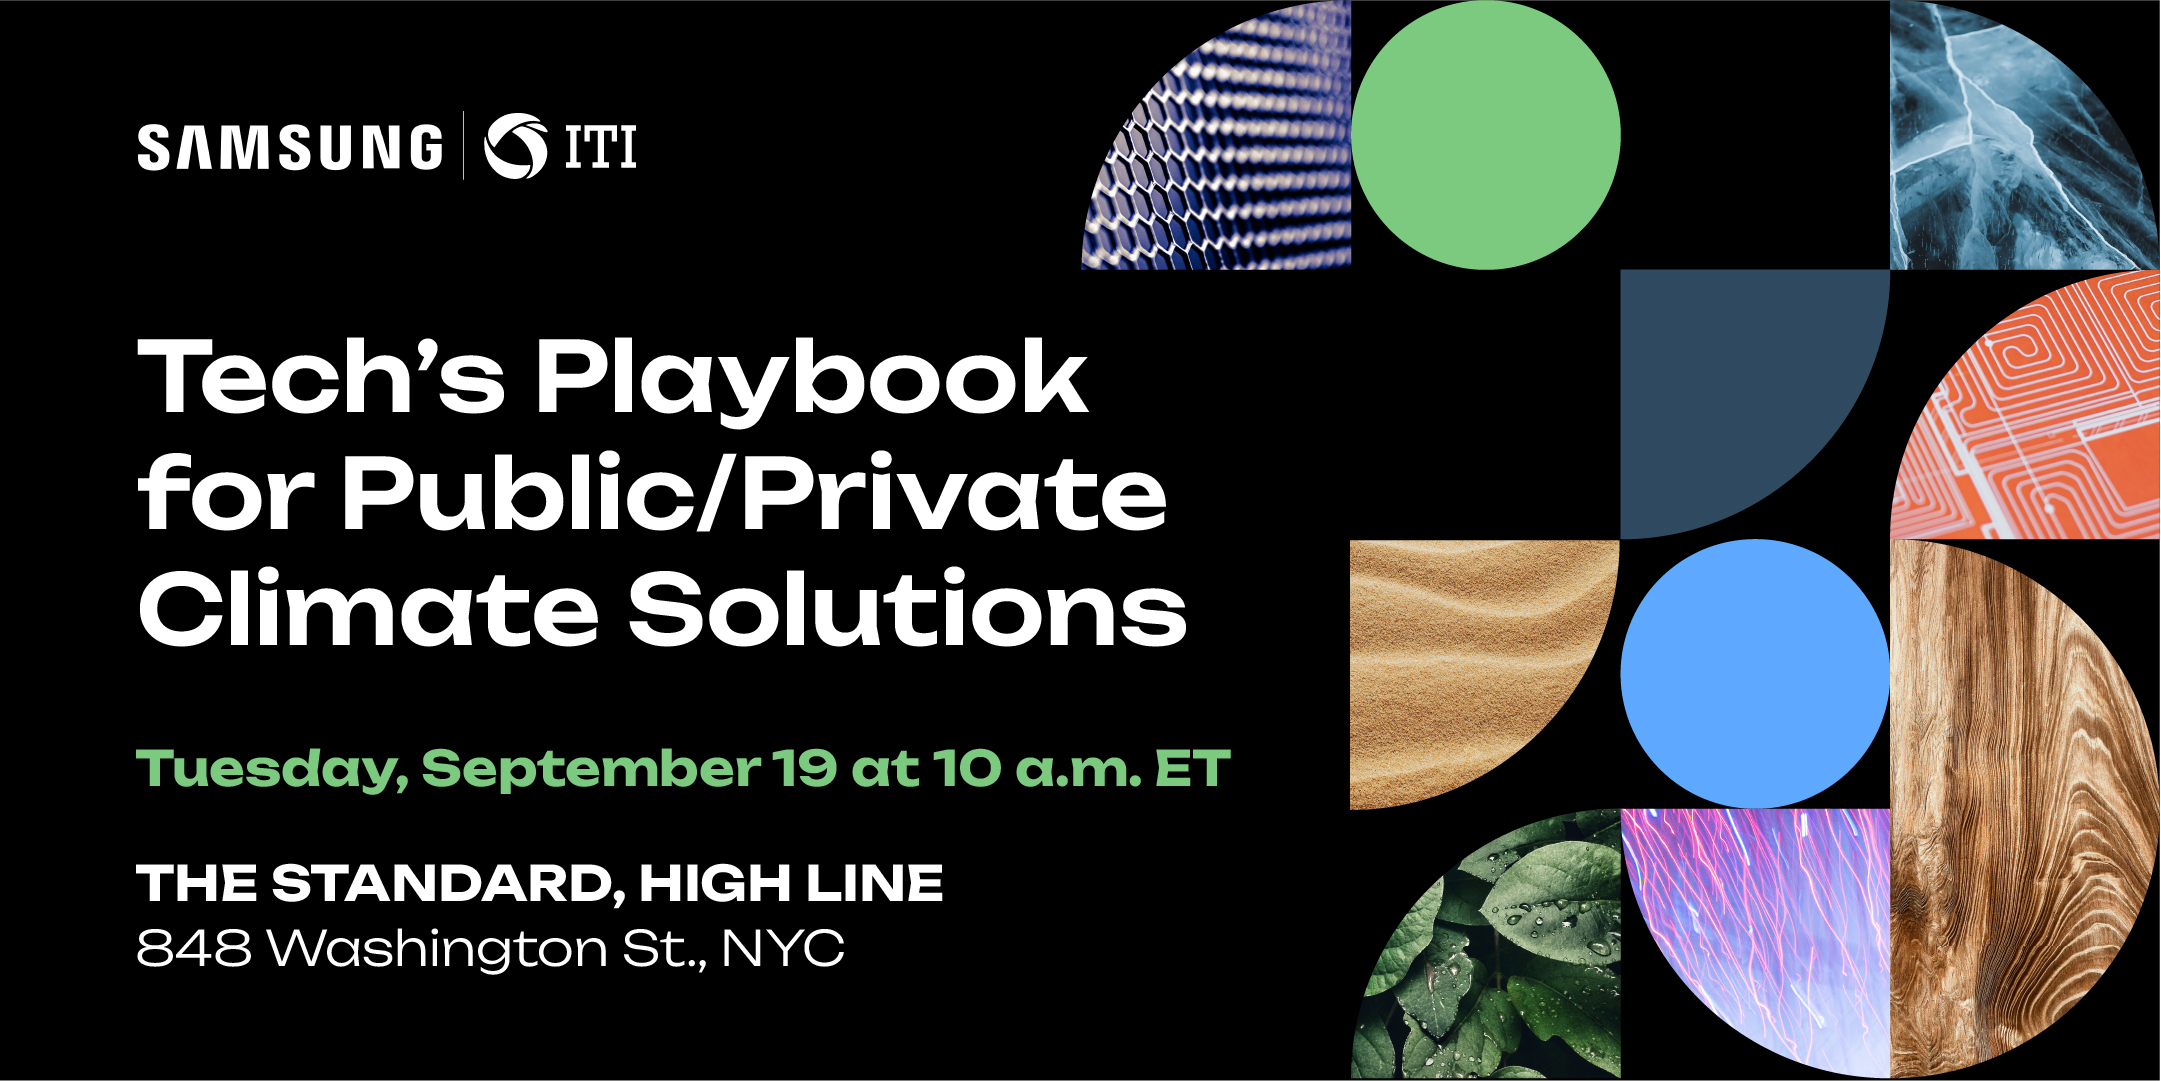 tech-playbook-public-private-climate-solutions